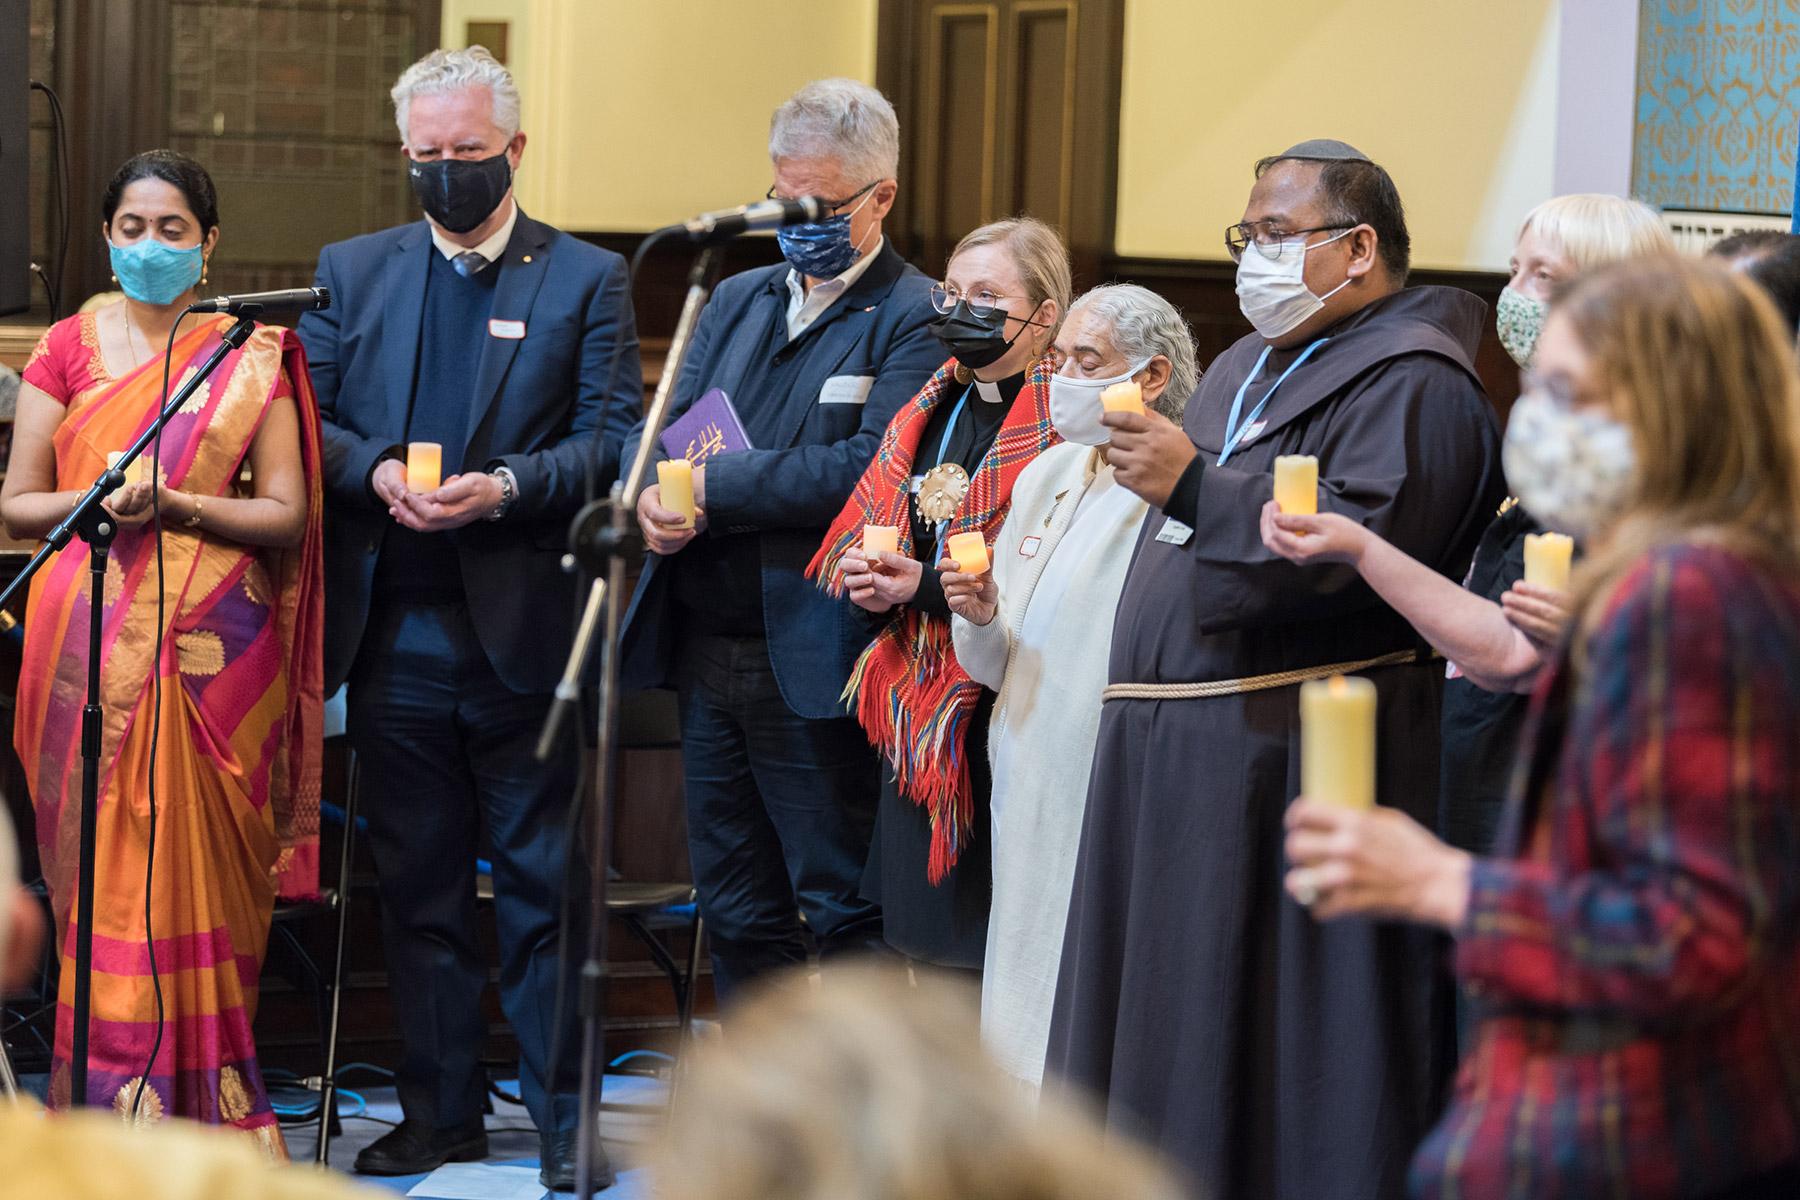 Religious leaders gathered for an interfaith service at Garnethill Synagogue on Sunday 31 October. All photos: LWF/Albin Hillert